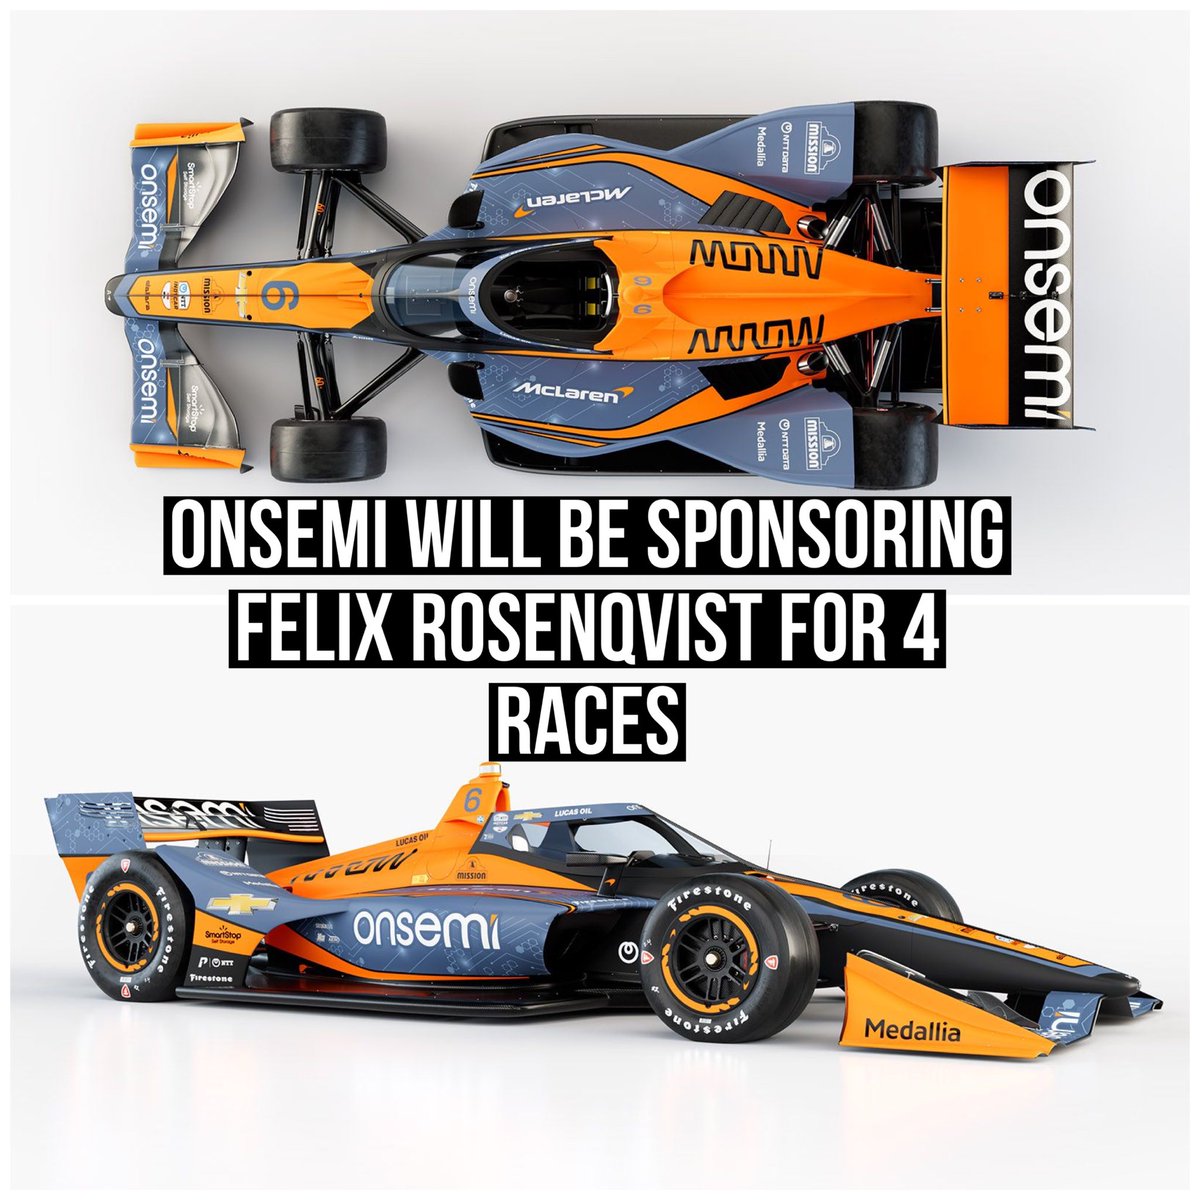 Onsemi will be sponsoring the #6 car of Felix Rosenqvist for four races
-Long beach
-Detroit
-Road America
-Bommartio 500
#indycar #indy500 #arrowmclarensp